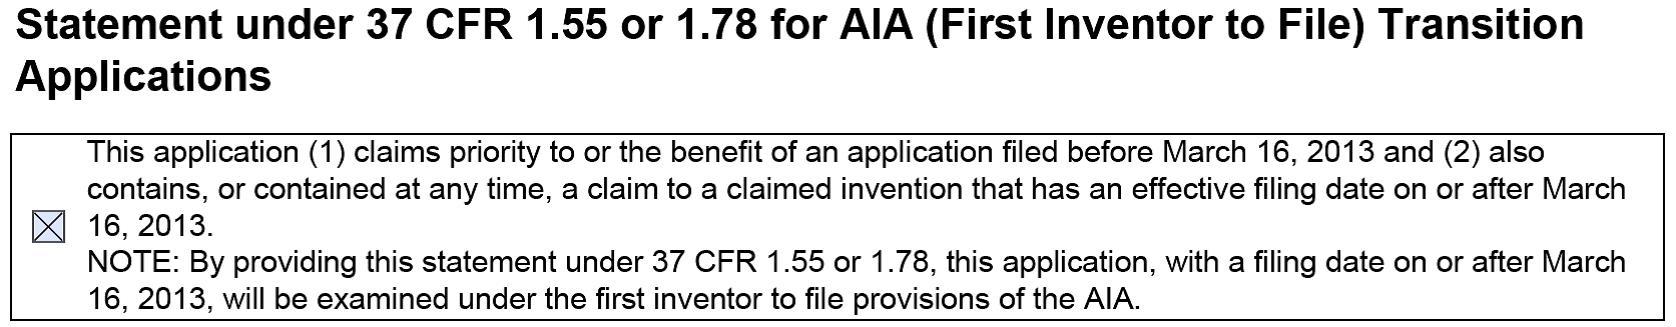 Statement 37 First Inventor to File Transition Applications